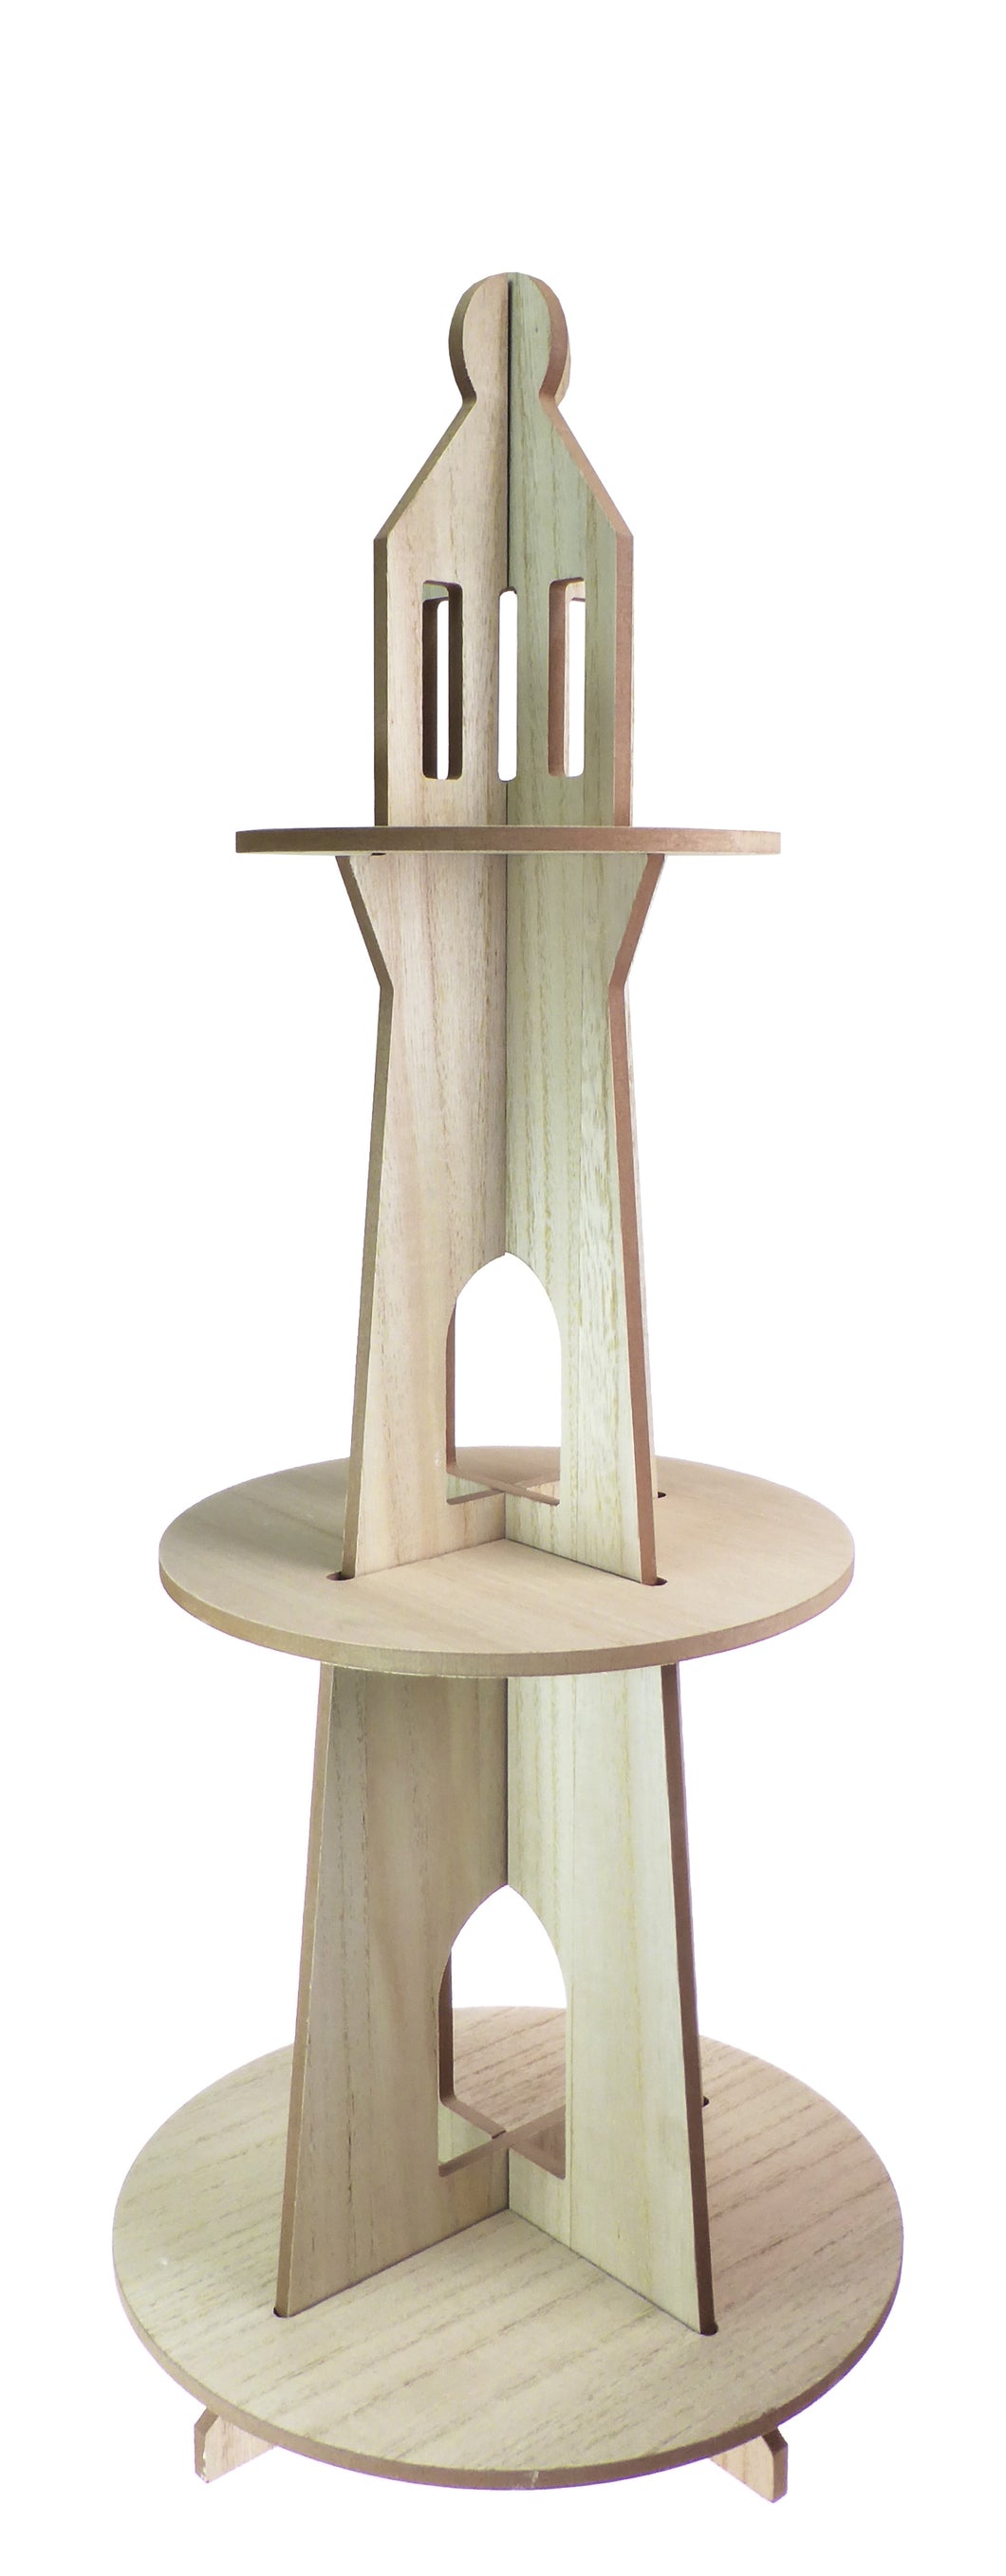 Wooden Lighthouse Display Stand / Shelf Large